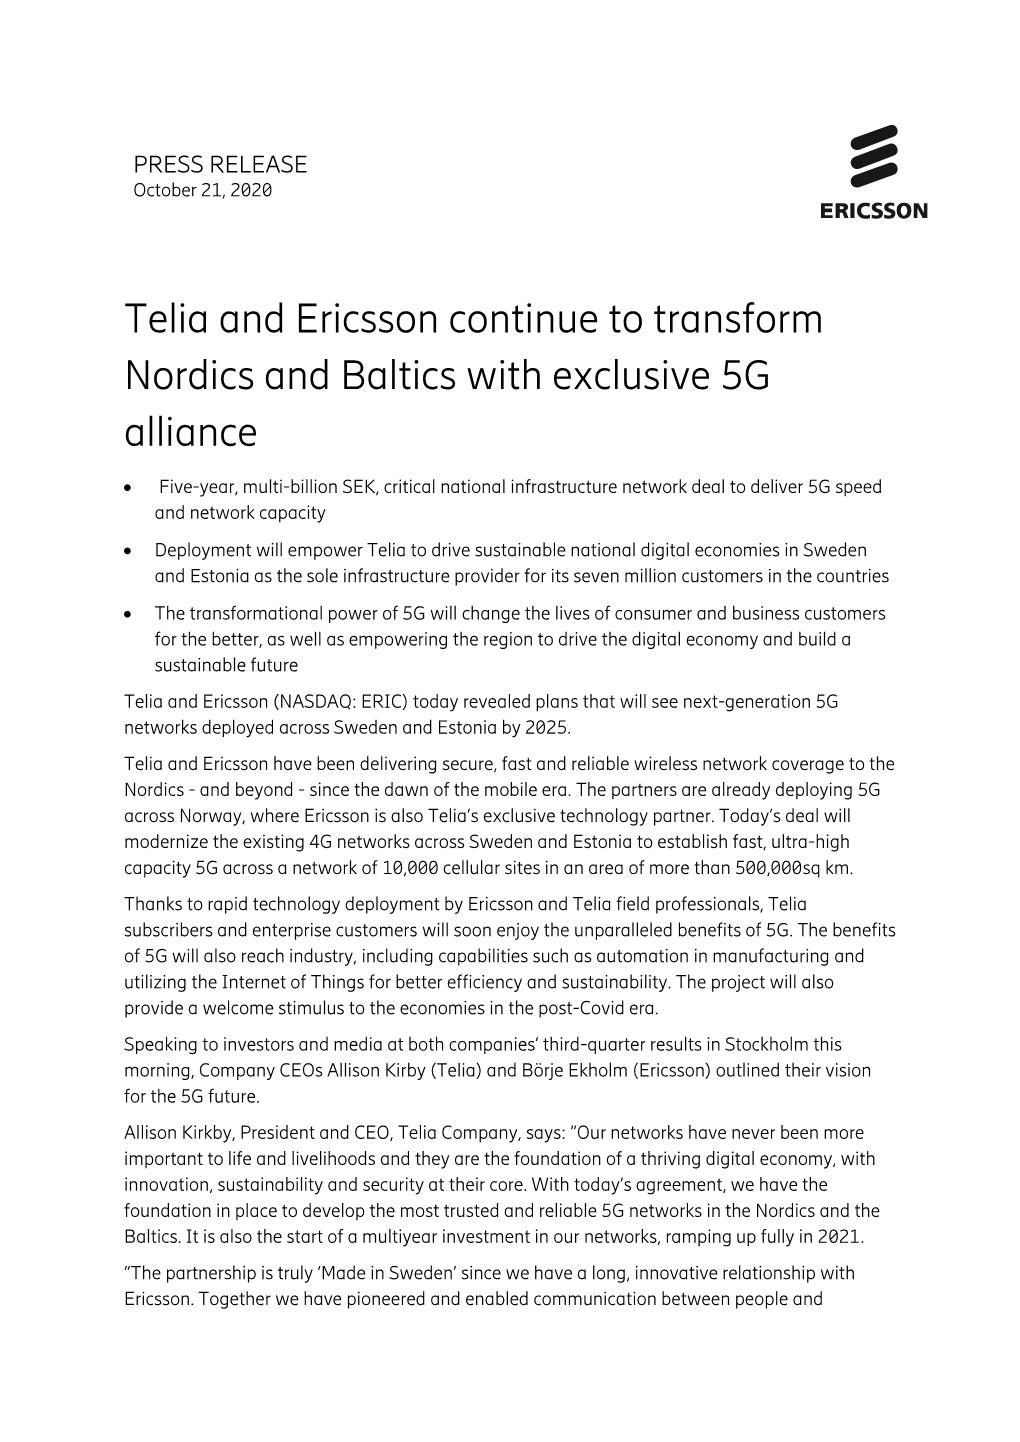 Telia and Ericsson Continue to Transform Nordics and Baltics with Exclusive 5G Alliance